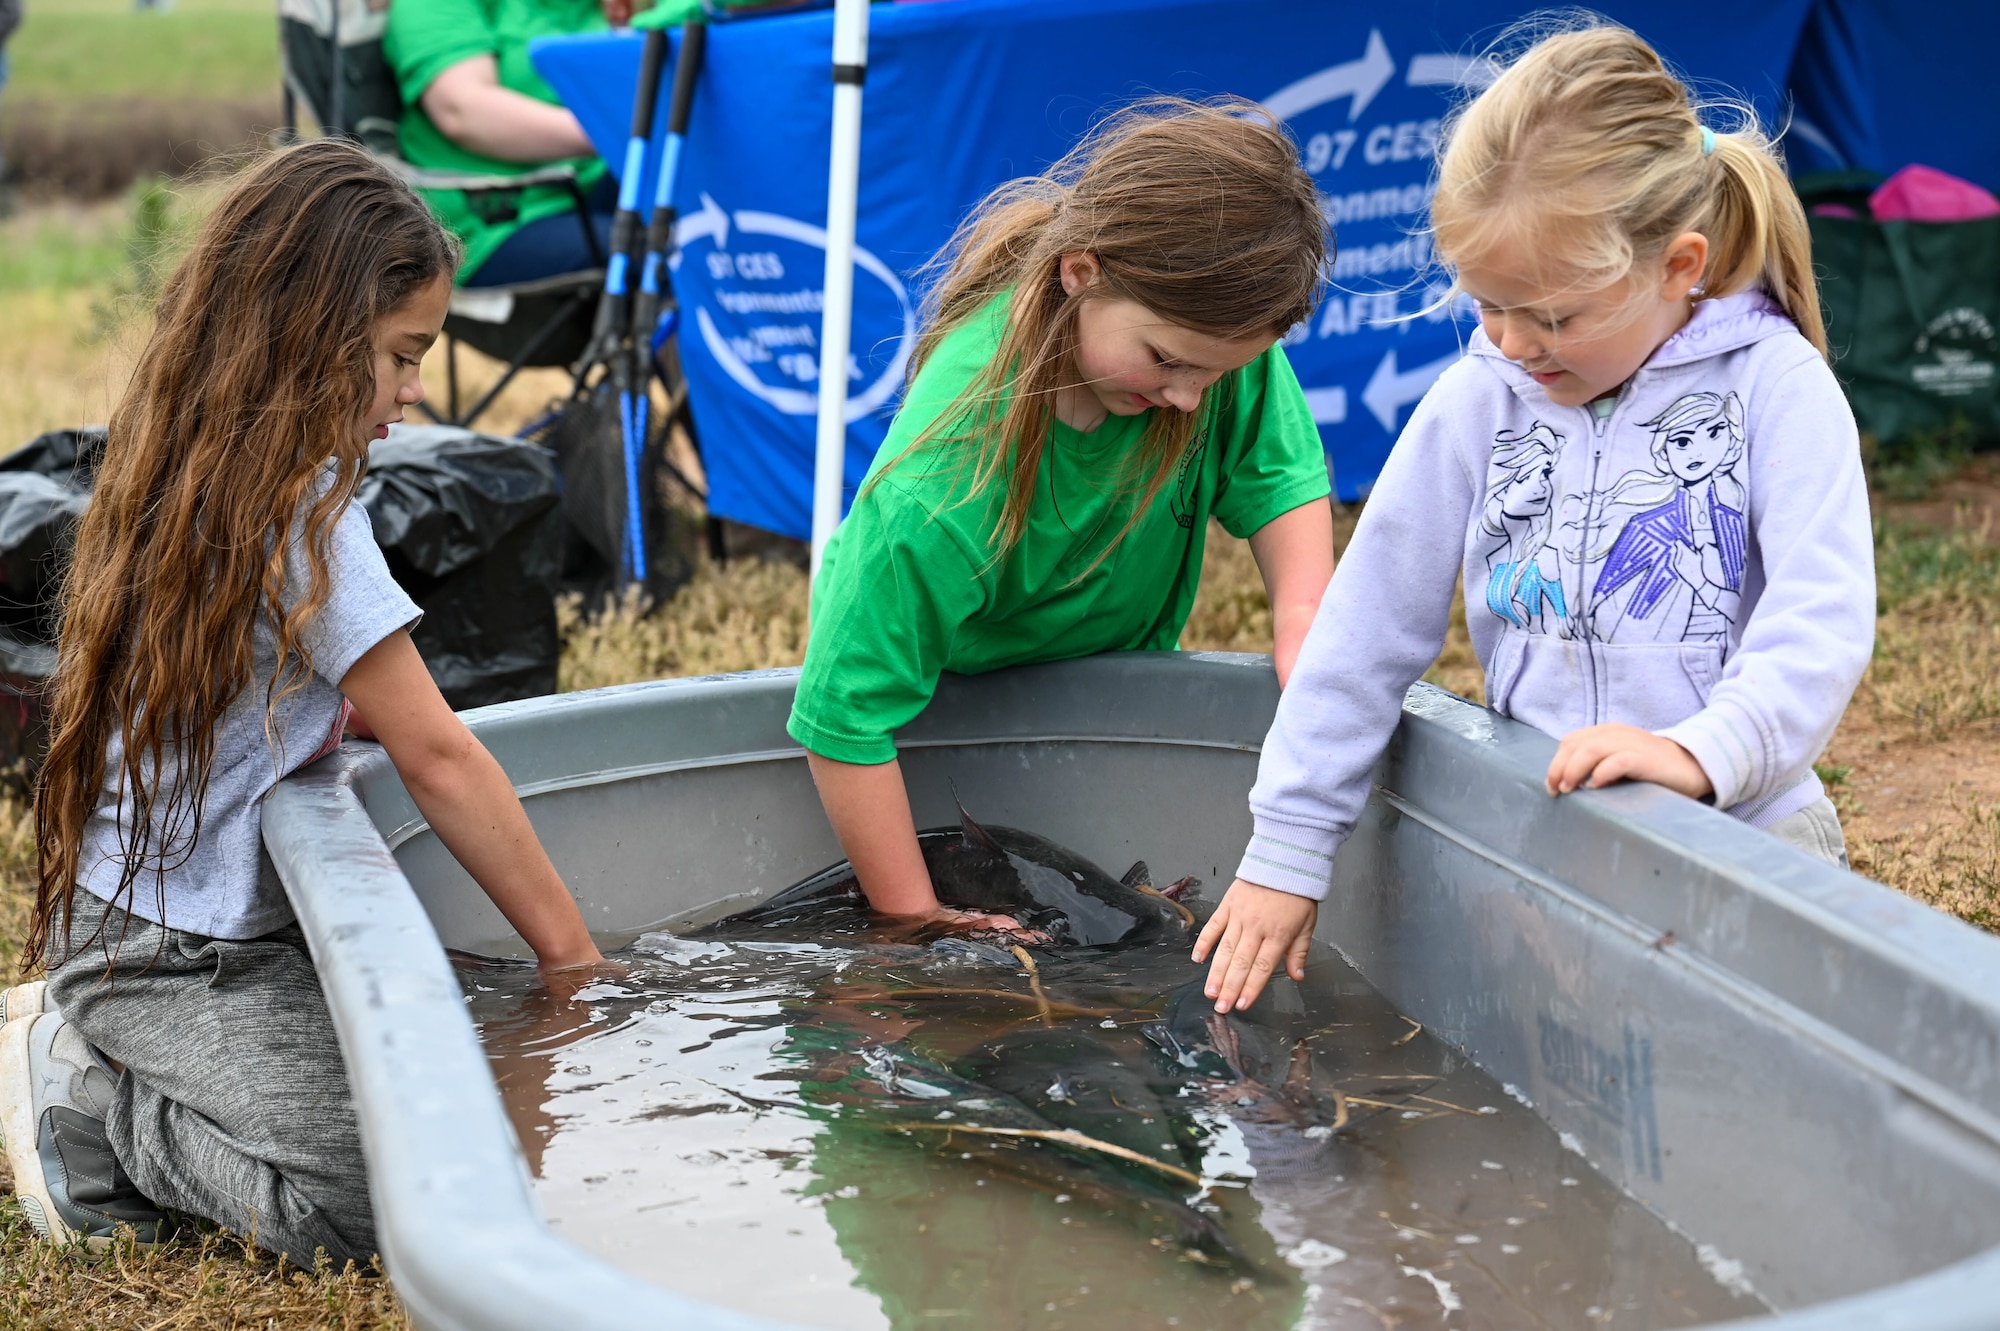 Children touch live catfish that were caught at the 97th Civil Engineer Squadron environmental flight’s annual fishing derby at the base pond on Altus Air Force Base, Oklahoma, April, 28, 2023. The environmental team filled the pond with live catfish for the event. (U.S. Air Force photo by Airman 1st Class Heidi Bucins)